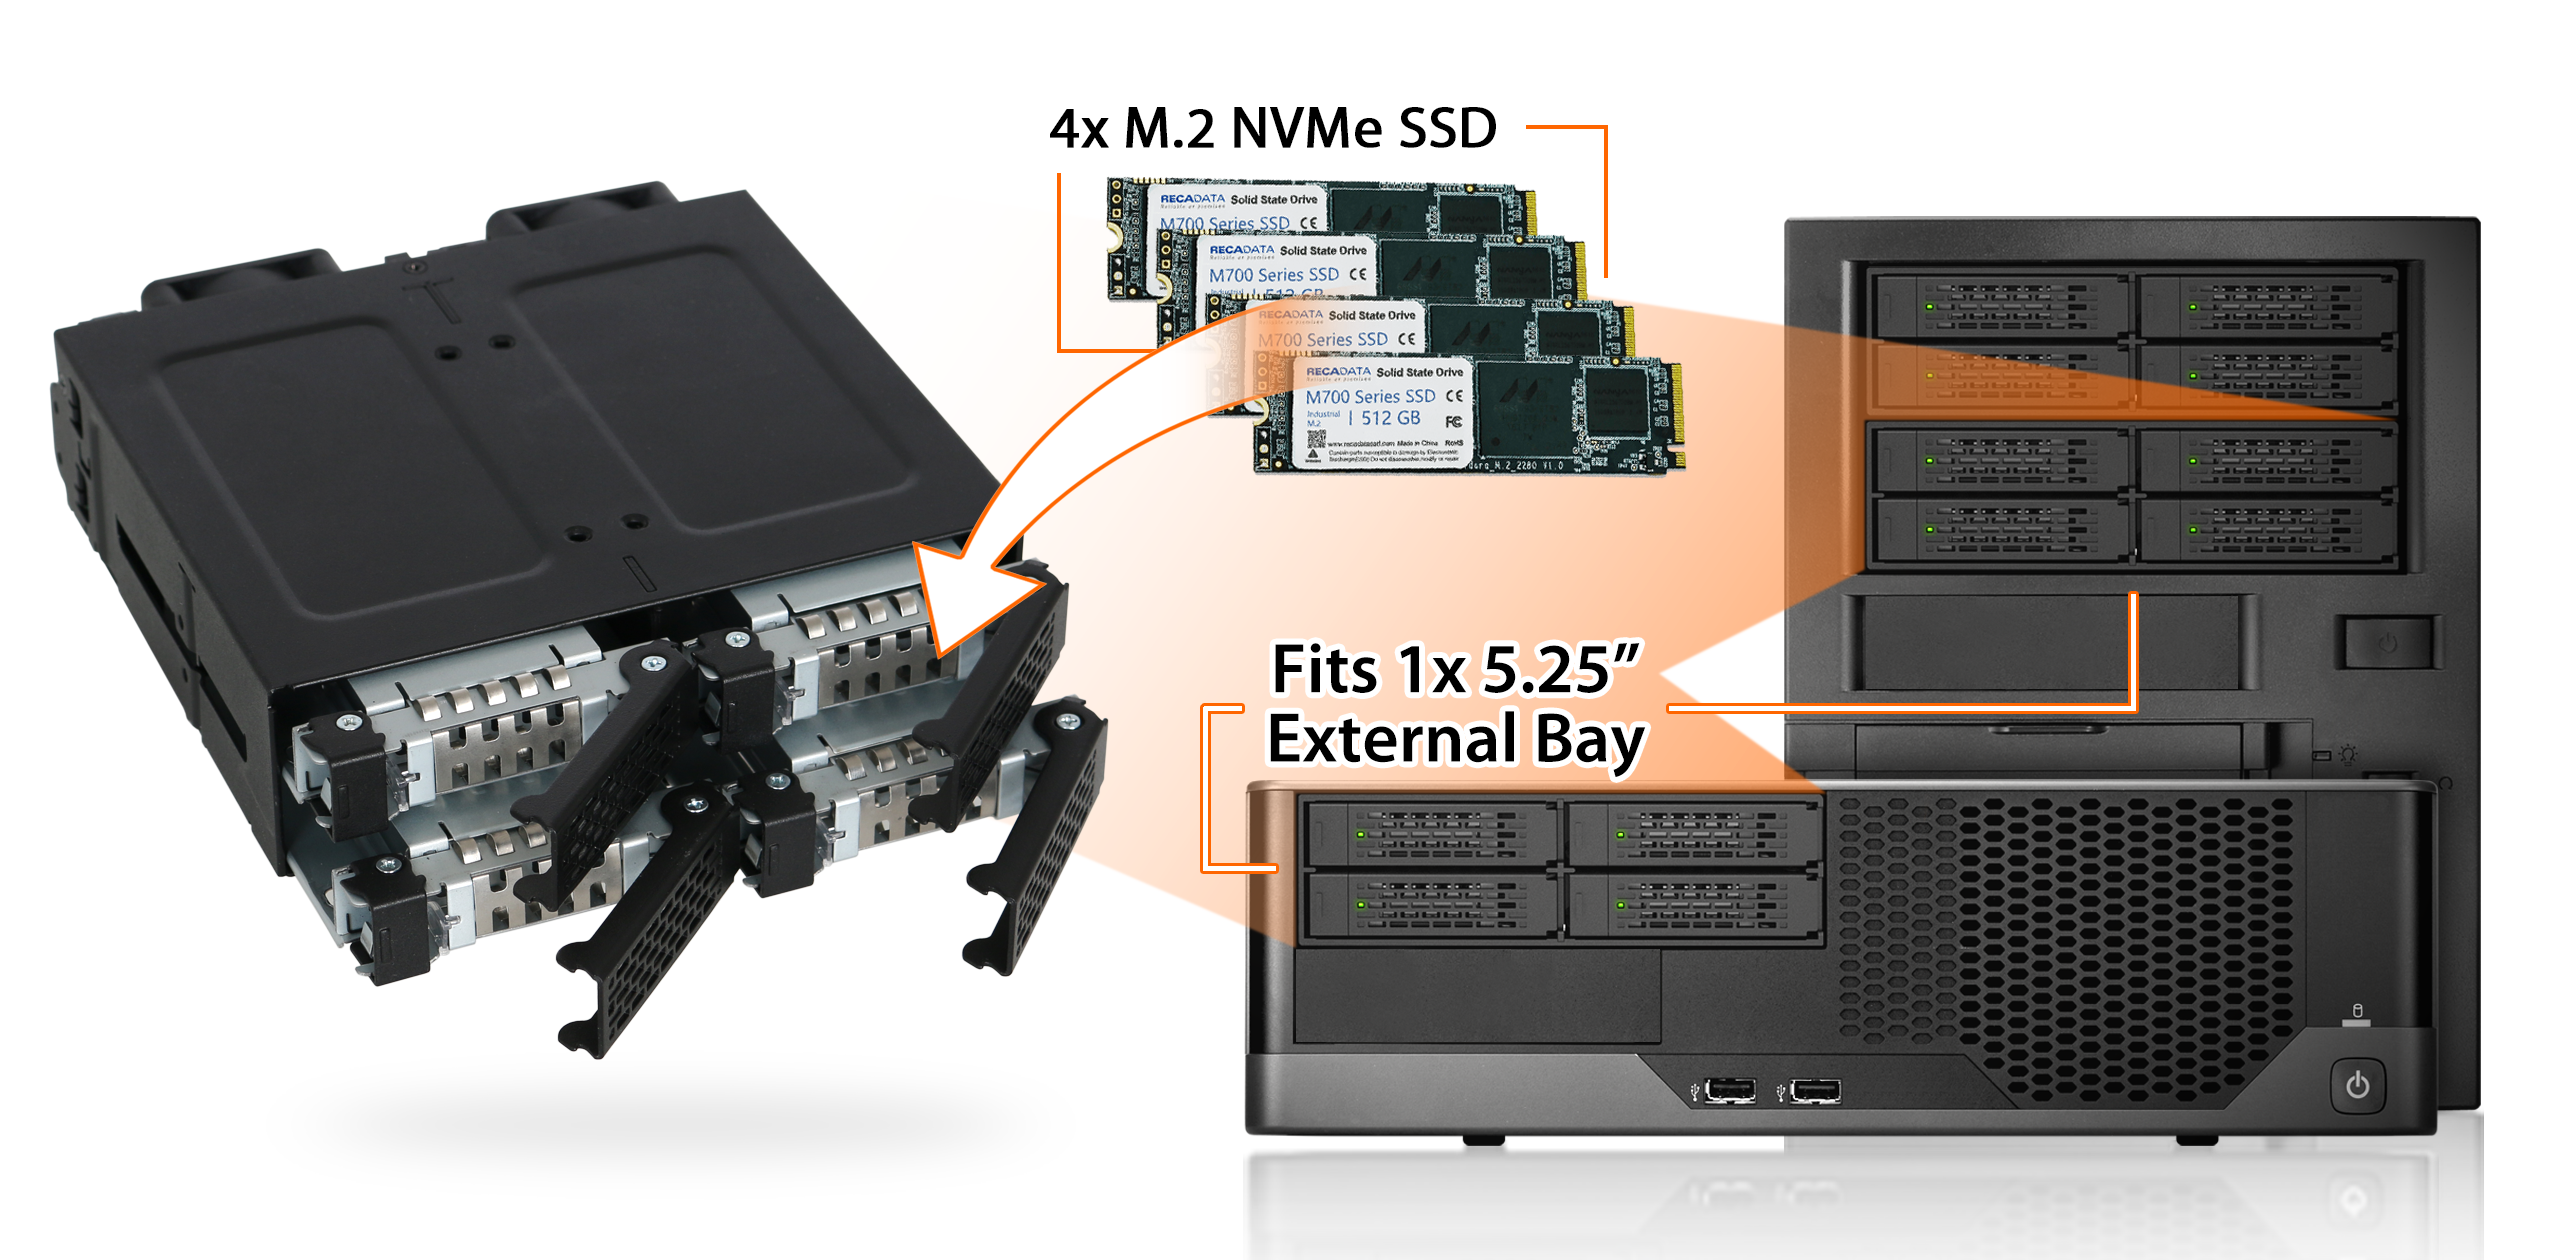 How to Install an NVMe M.2 SSD Hard Drive and Why You Should